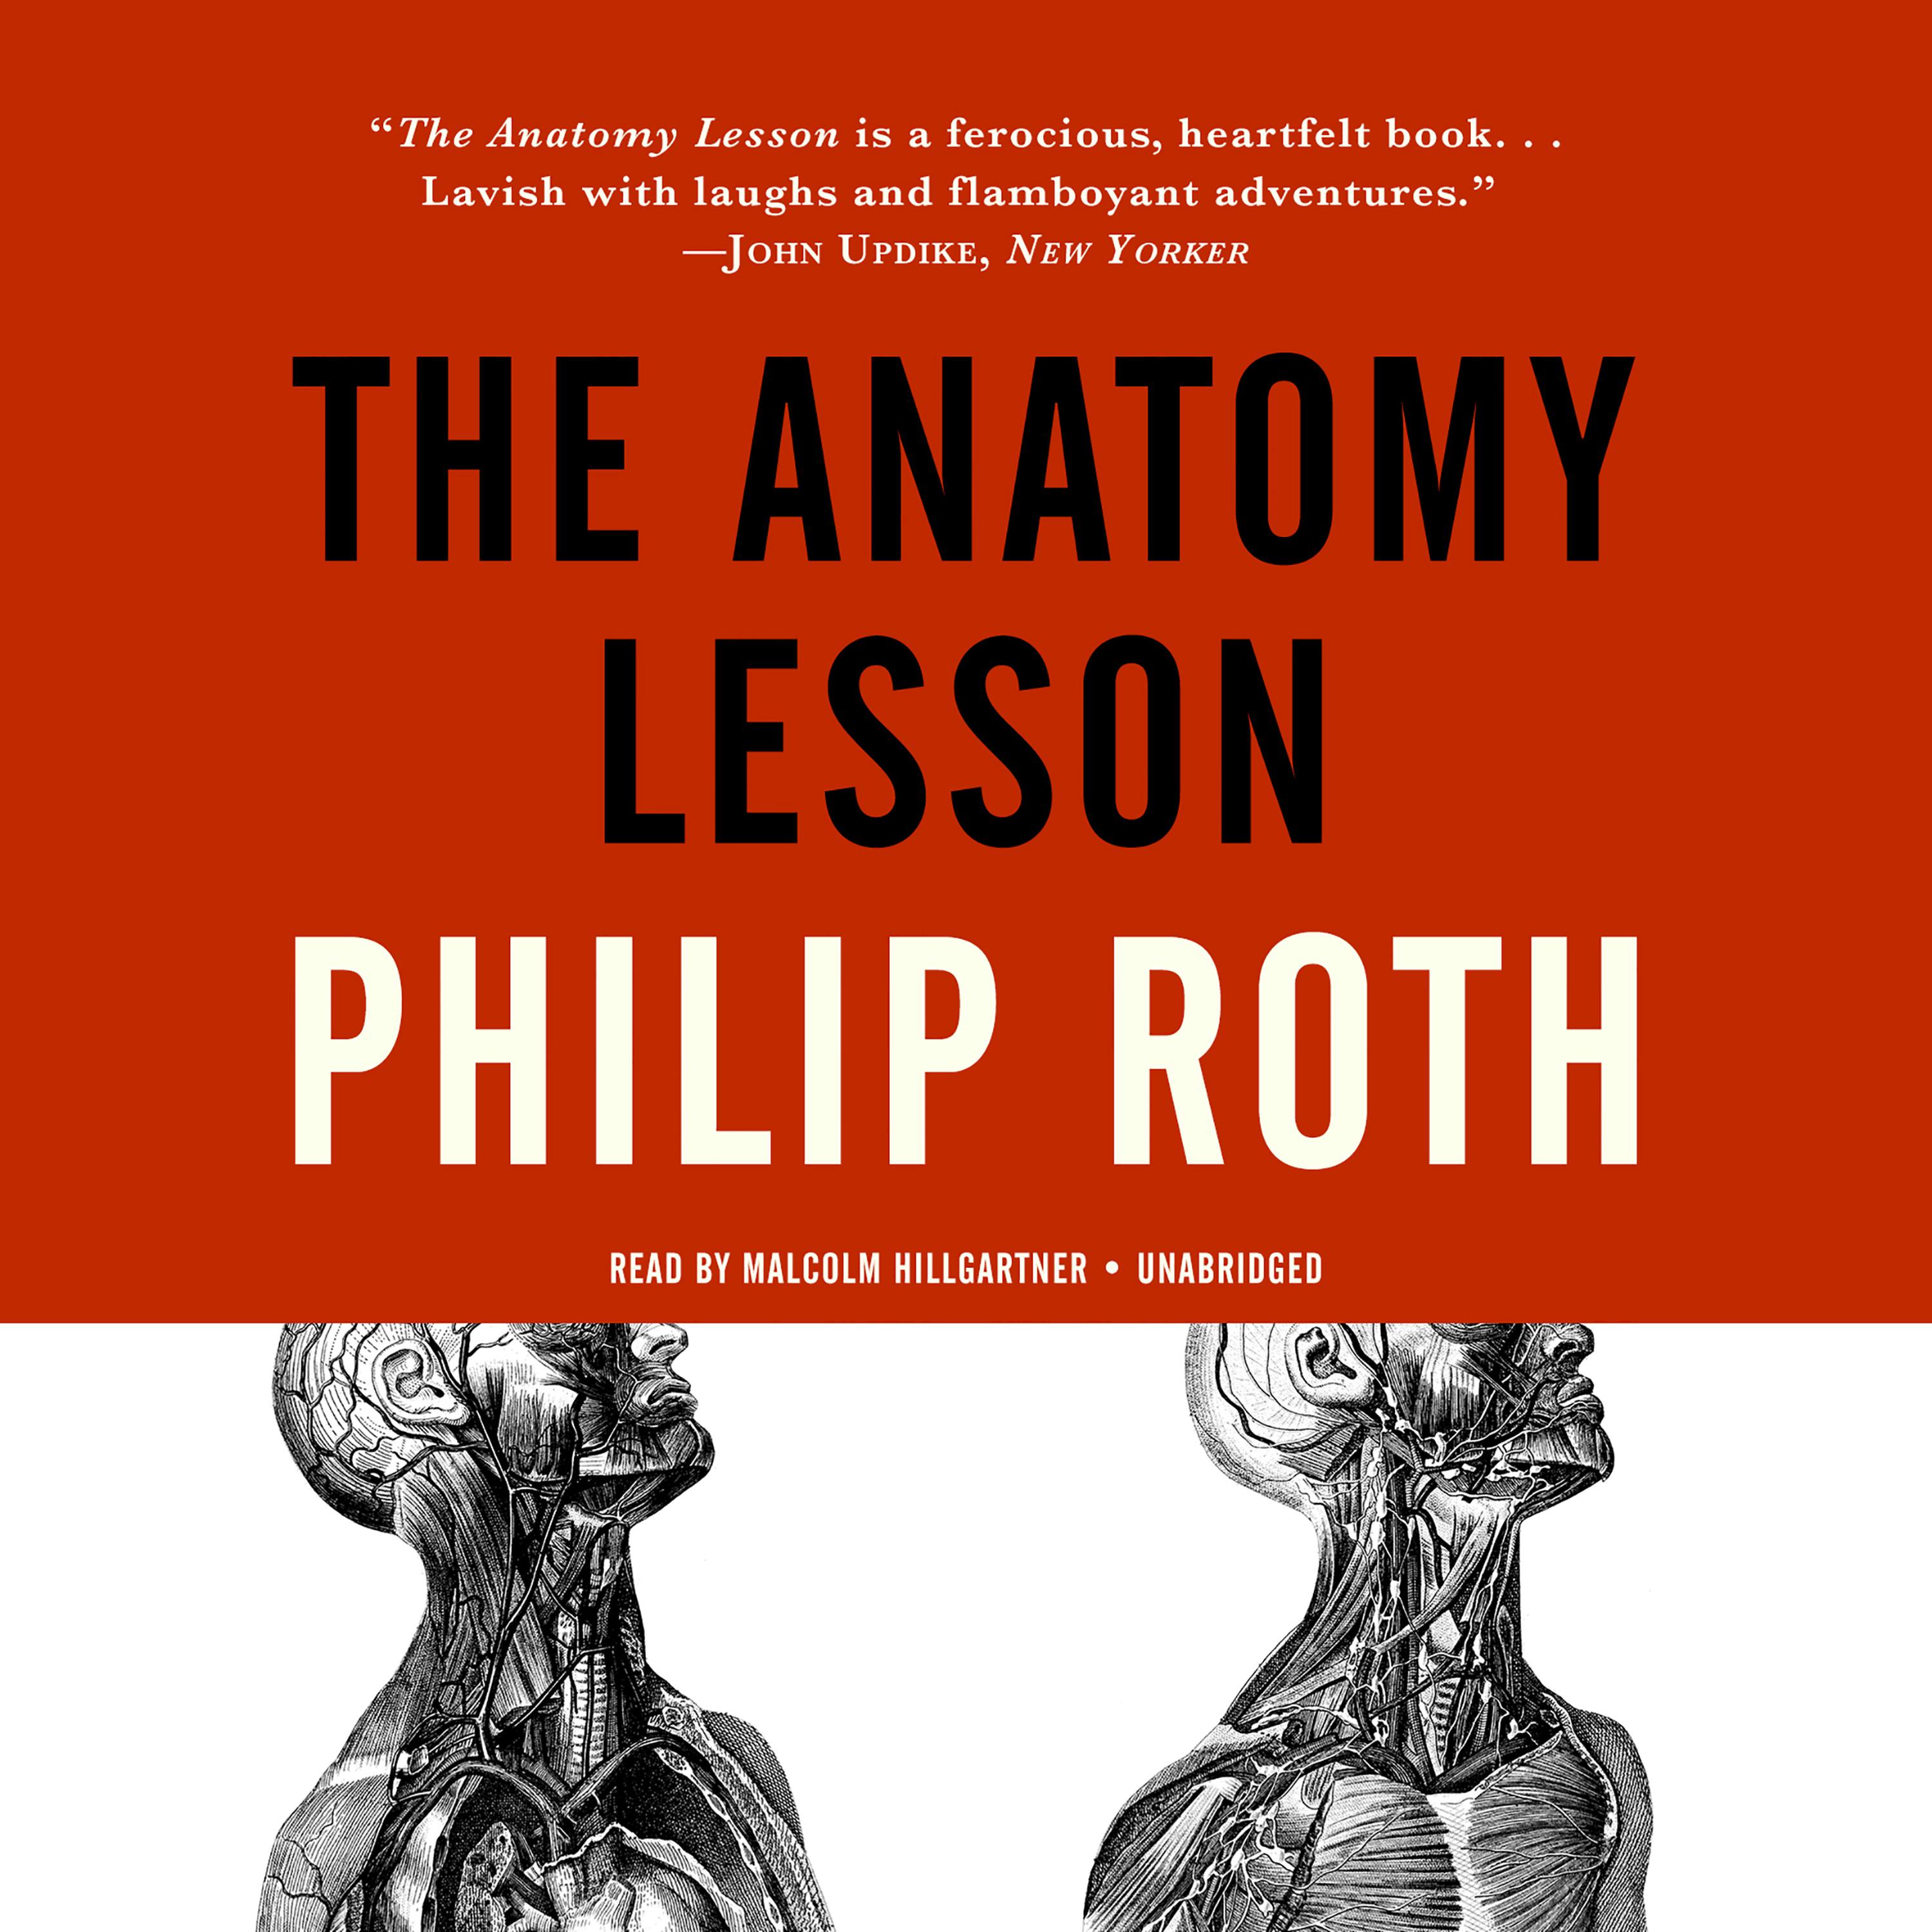 The Anatomy Lesson - Audiobook by Philip Roth